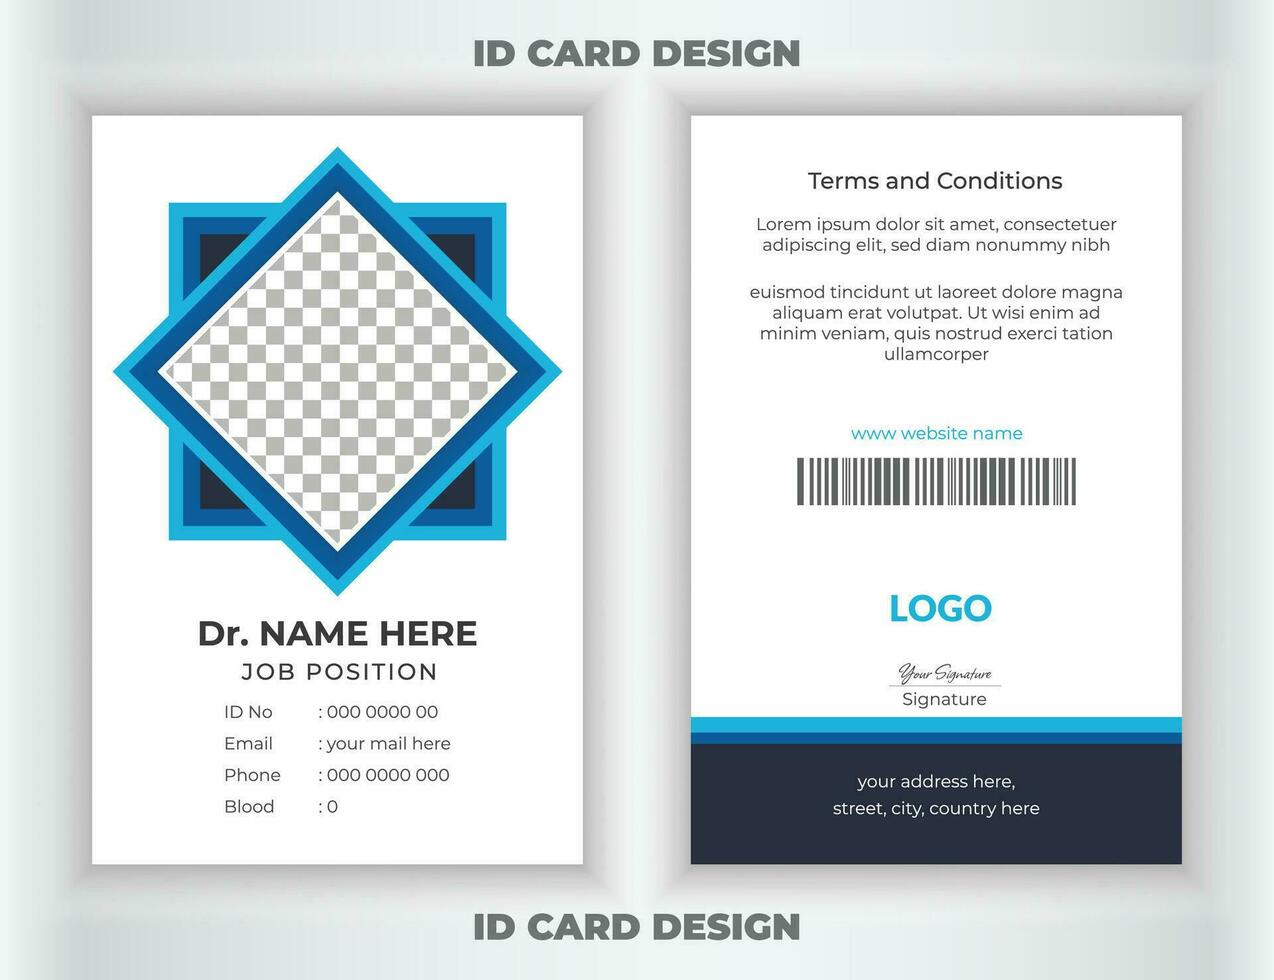 Professional Identity Card Template for Medical, Modern Doctor ID Card Template. Medical abstract id card design template. Medical Nurse ID card Design. Modern Doctor ID Card. vector